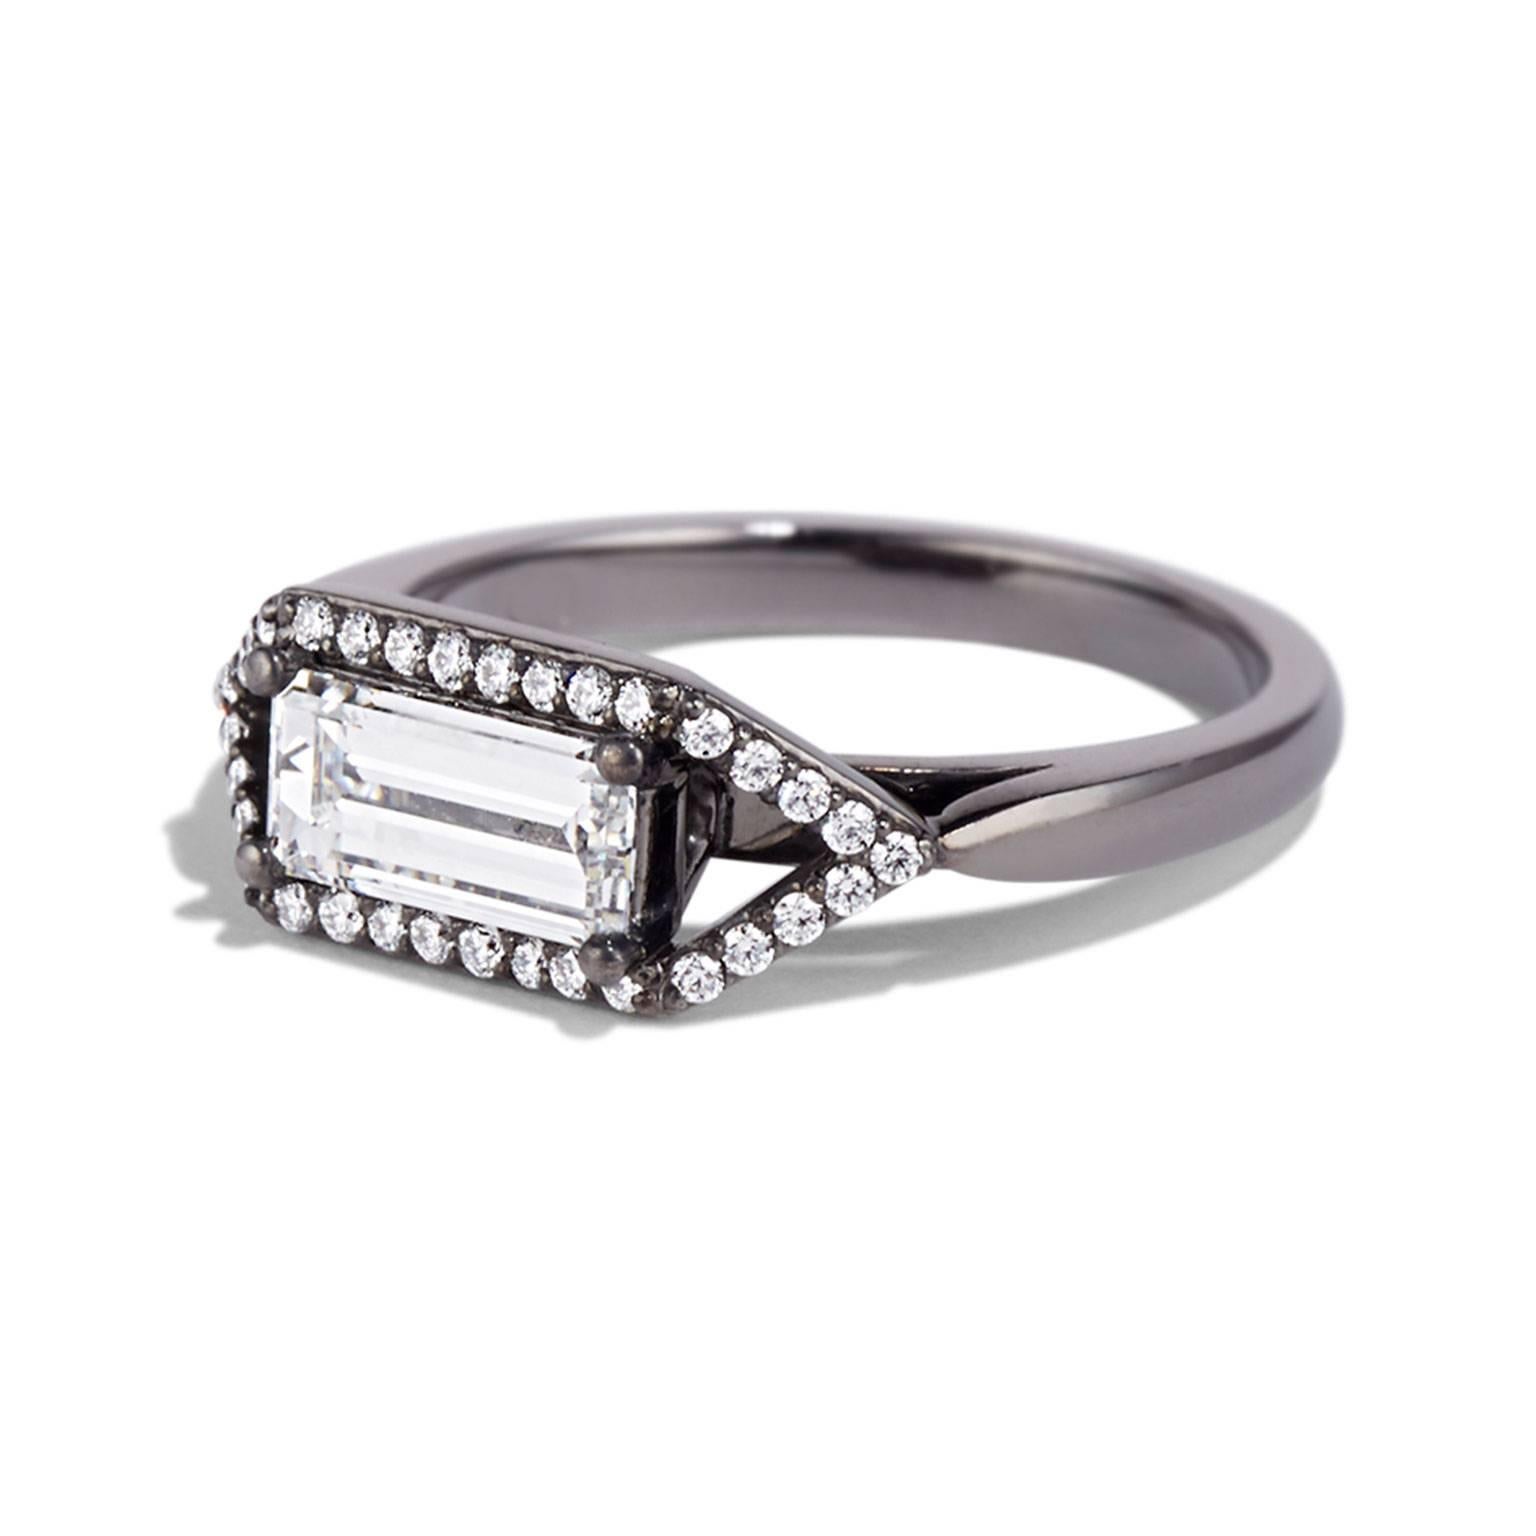 THE ZOLA RING IS A DELICATE ENGAGEMENT OPTION WHERE A CONSTELLATION OF SMALLER STONES DRAWS ATTENTION TO THE UNIQUE RECTANGULAR SHAPE OF THE CENTRAL DIAMOND. THE CONTRAST OF DIAMONDS AGAINST BLACK PLATED GOLD PROVIDES A CLASSIC ART DECO AESTHETIC.